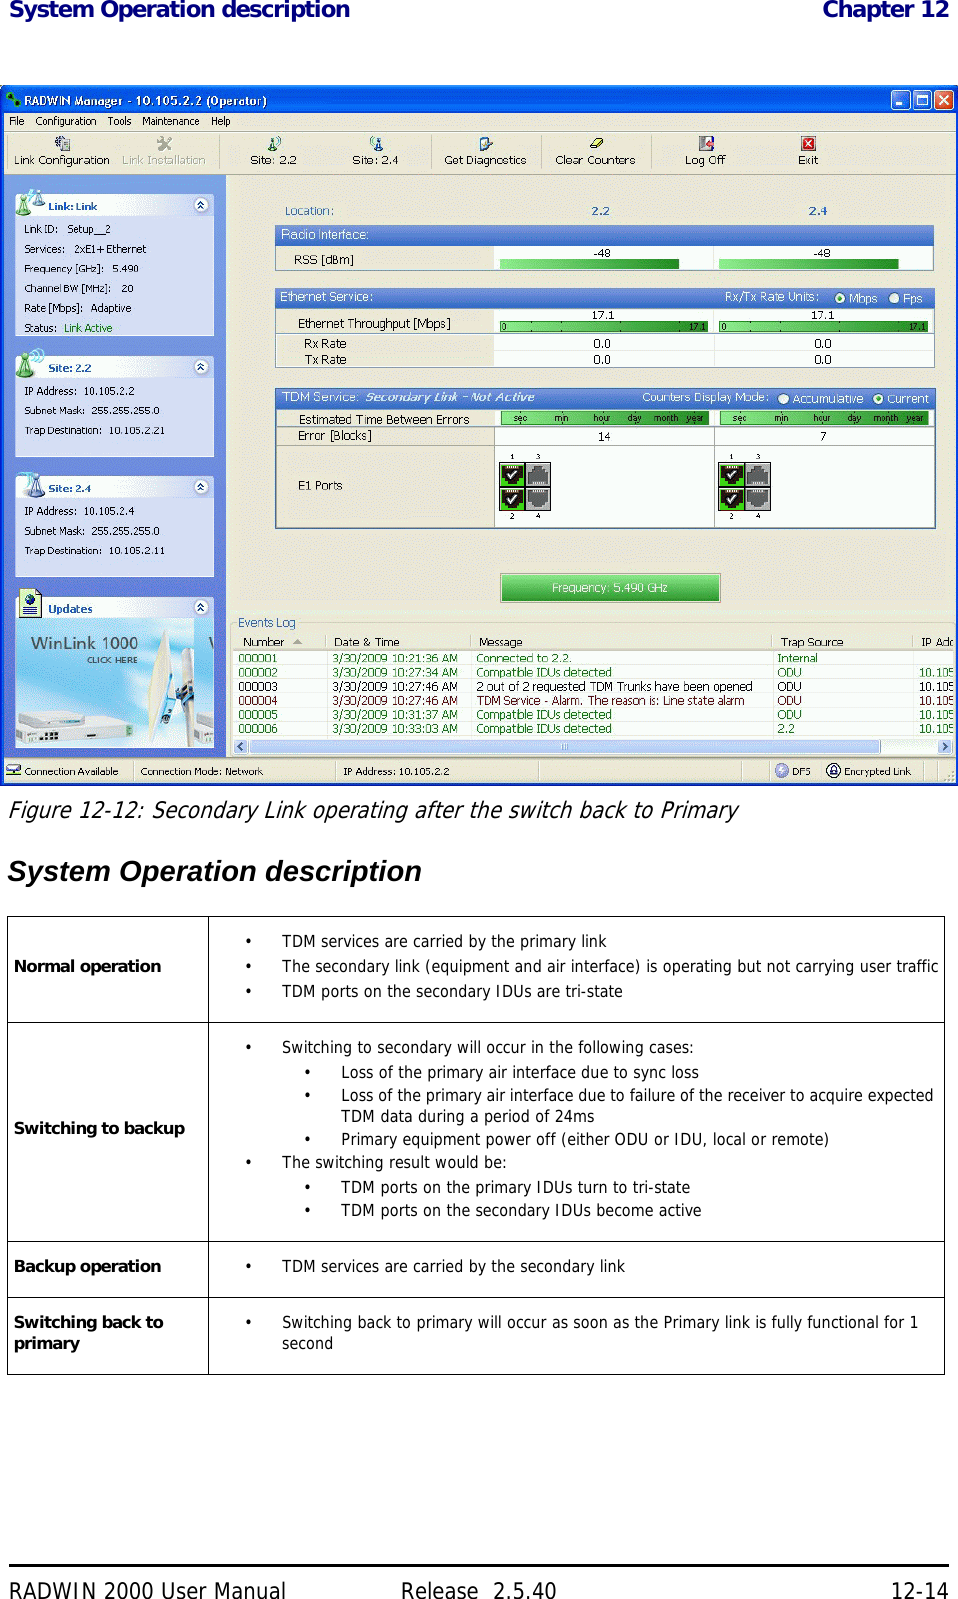 System Operation description Chapter 12RADWIN 2000 User Manual Release  2.5.40 12-14Figure 12-12: Secondary Link operating after the switch back to PrimarySystem Operation description Normal operation • TDM services are carried by the primary link • The secondary link (equipment and air interface) is operating but not carrying user traffic•TDM ports on the secondary IDUs are tri-stateSwitching to backup• Switching to secondary will occur in the following cases:• Loss of the primary air interface due to sync loss• Loss of the primary air interface due to failure of the receiver to acquire expected TDM data during a period of 24ms• Primary equipment power off (either ODU or IDU, local or remote)• The switching result would be:• TDM ports on the primary IDUs turn to tri-state • TDM ports on the secondary IDUs become activeBackup operation • TDM services are carried by the secondary linkSwitching back to primary • Switching back to primary will occur as soon as the Primary link is fully functional for 1 second